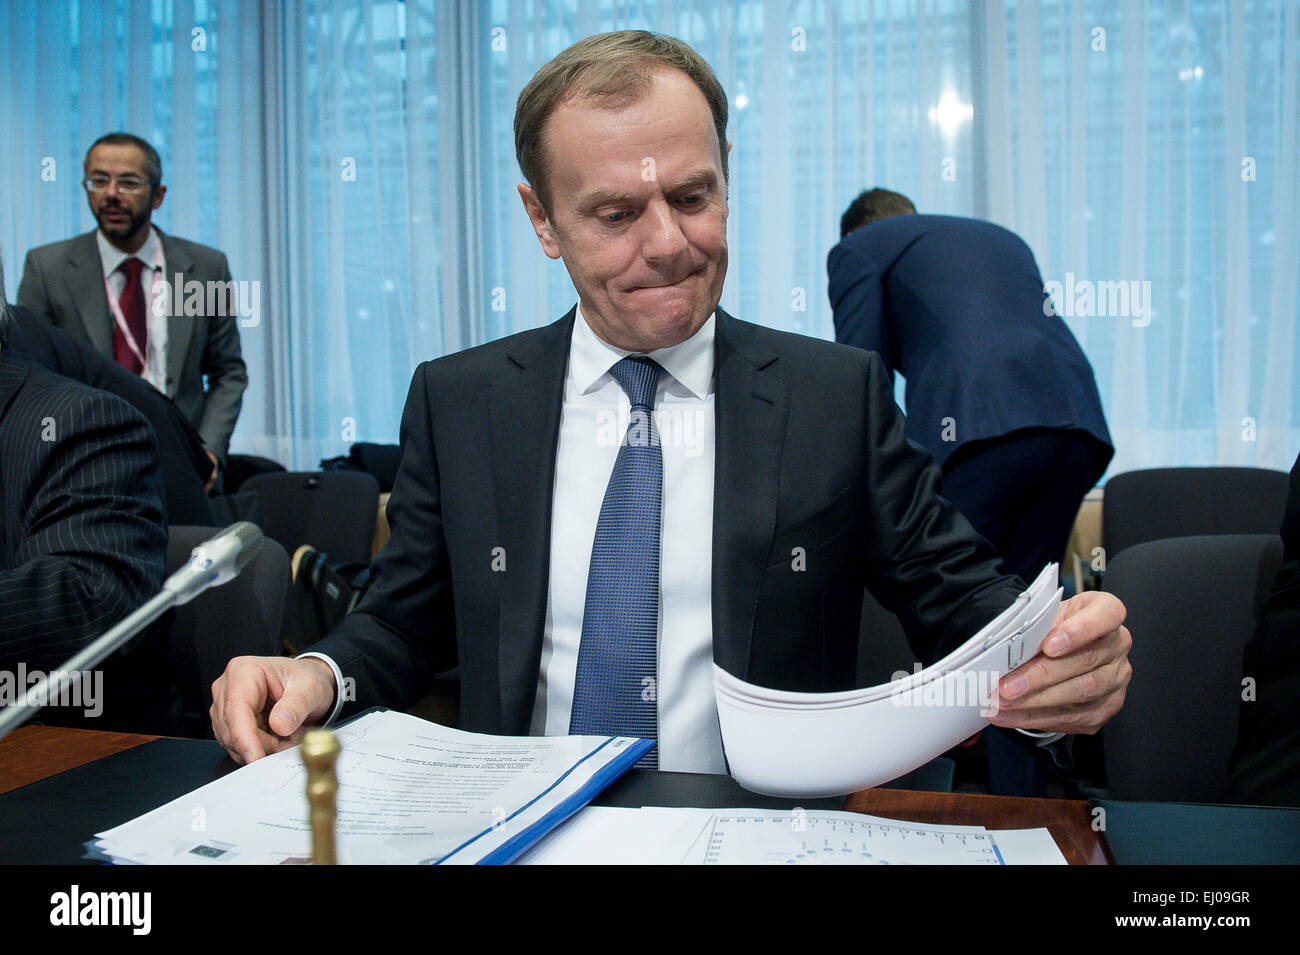 Donald Tusk, the president of the European Council at the start of a Tripartite Social Summit ahead of the EU Summit in Brussels, Belgium on 19.03.2015 by Wiktor Dabkowski Stock Photo